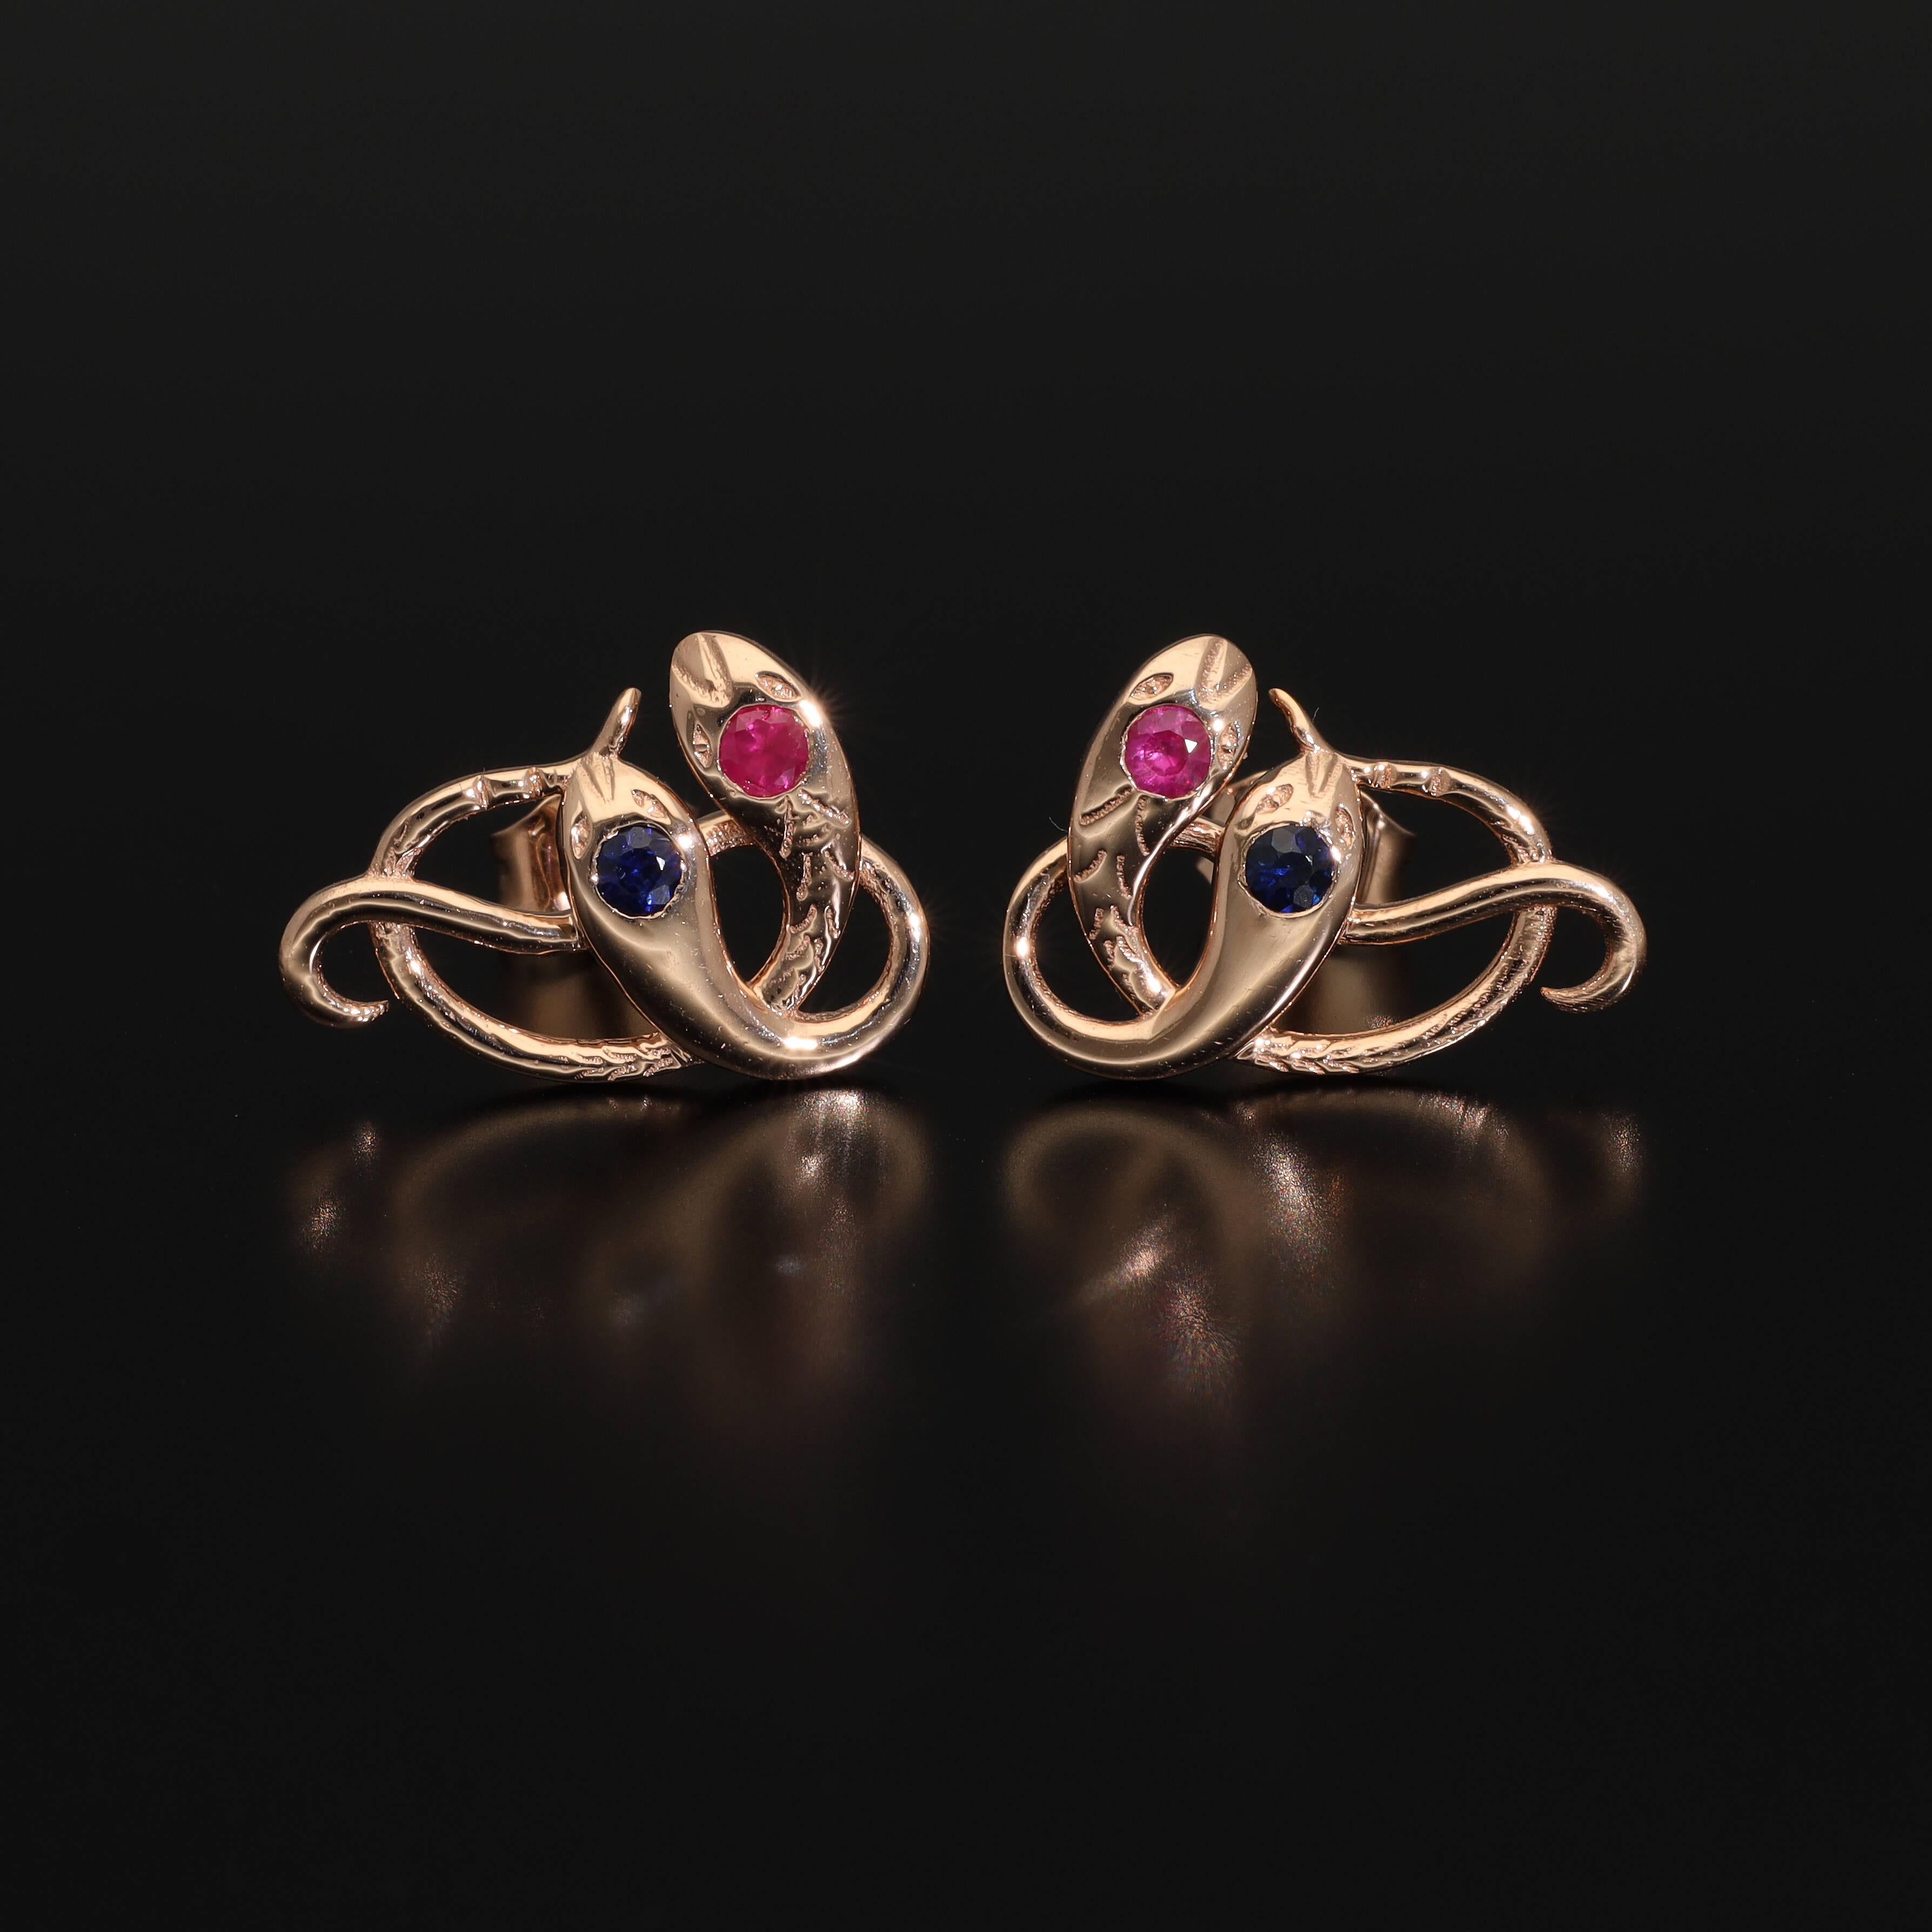 Victorian Revival Gold Snake Stud Earrings Ruby Sapphire Rose Gold Serpent Studs For Sale 1